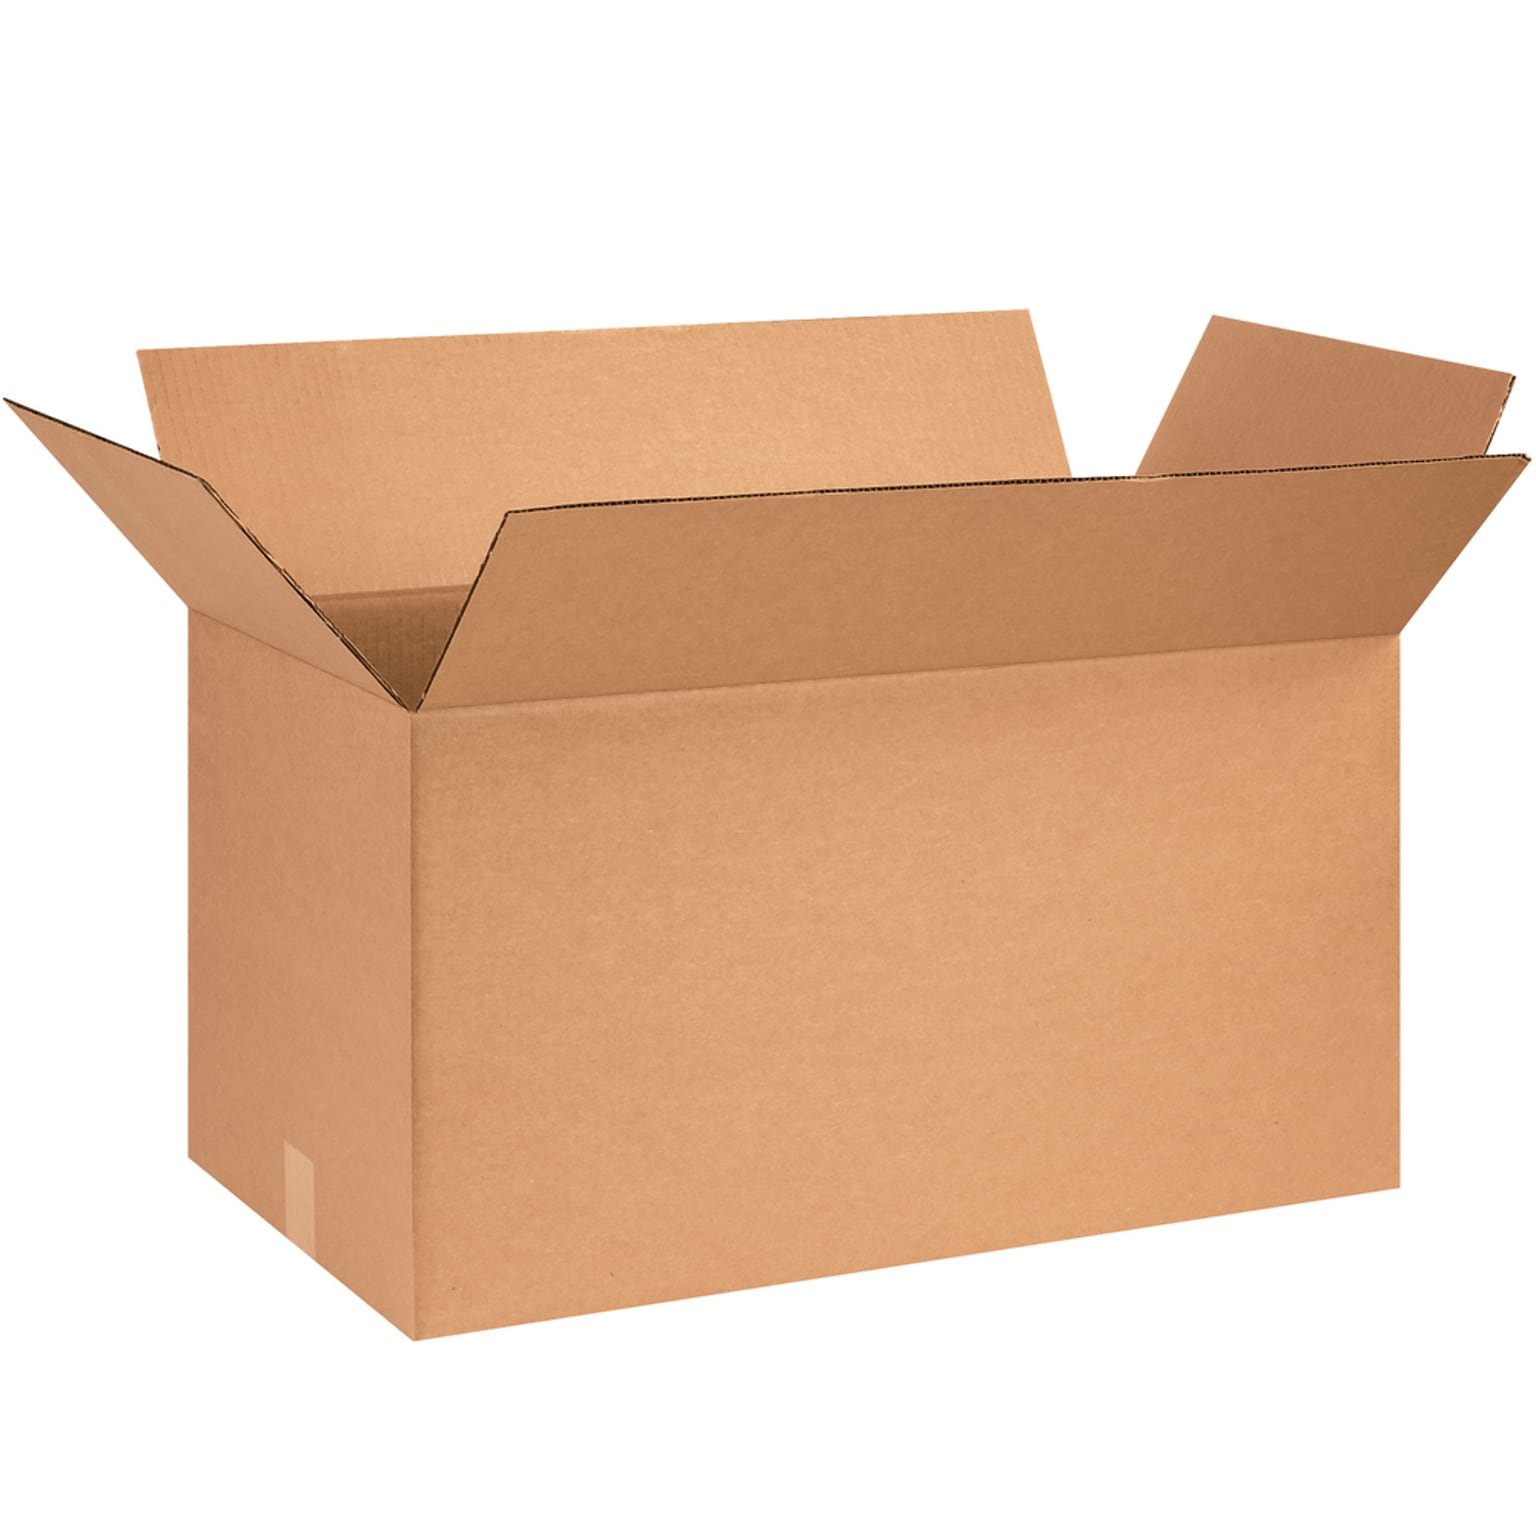 SI Products 26 x 14 x 14 Corrugated Shipping Boxes, 200#/ECT-32 Mullen Rated Corrugated, Pack of 10, (261414)